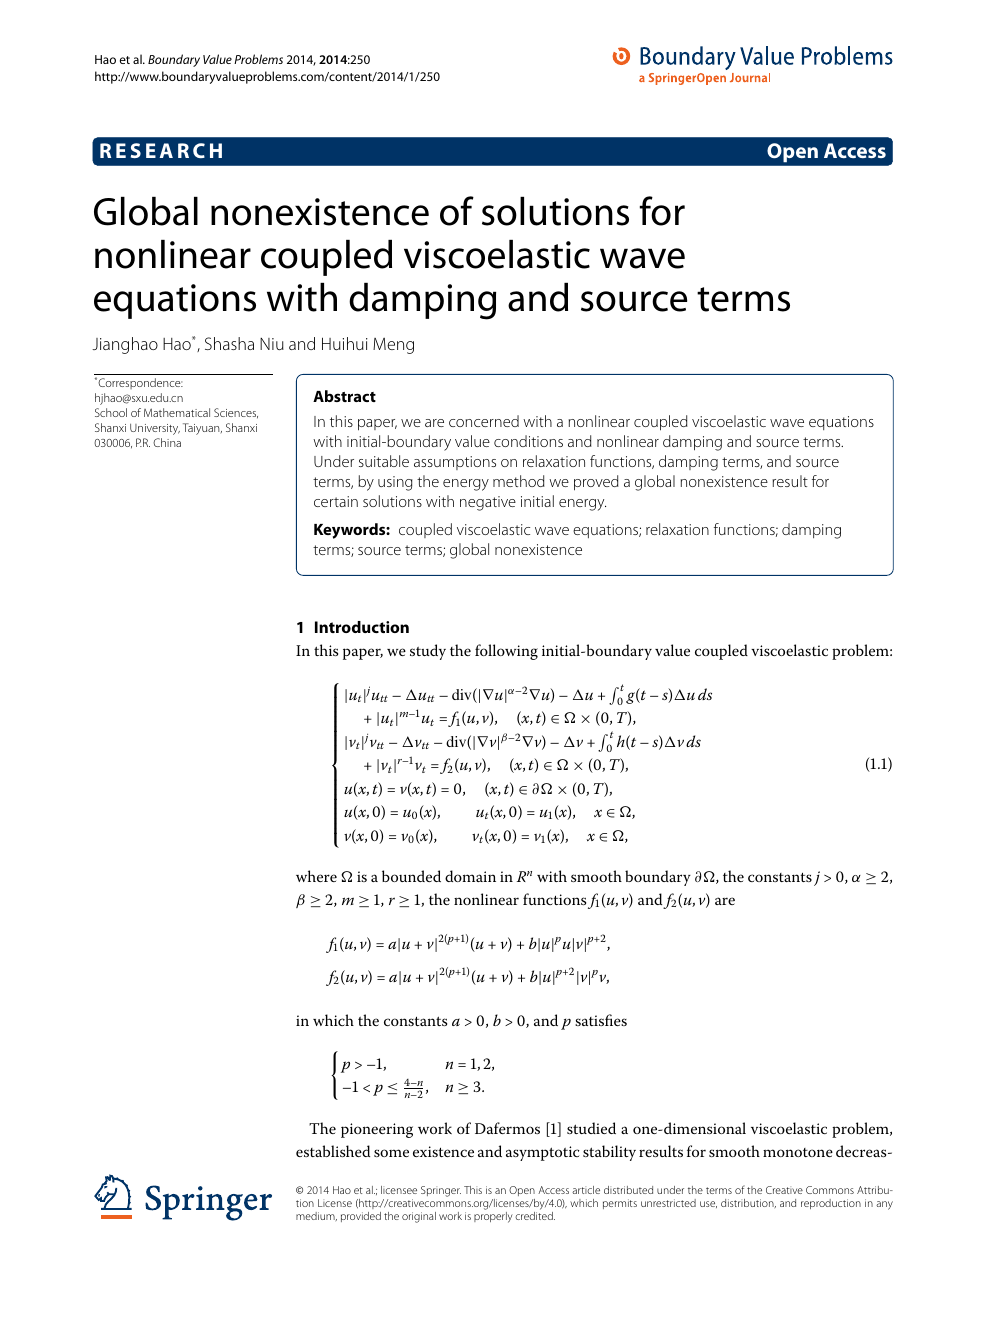 Global Nonexistence Of Solutions For Nonlinear Coupled Viscoelastic Wave Equations With Damping And Source Terms Topic Of Research Paper In Mathematics Download Scholarly Article Pdf And Read For Free On Cyberleninka